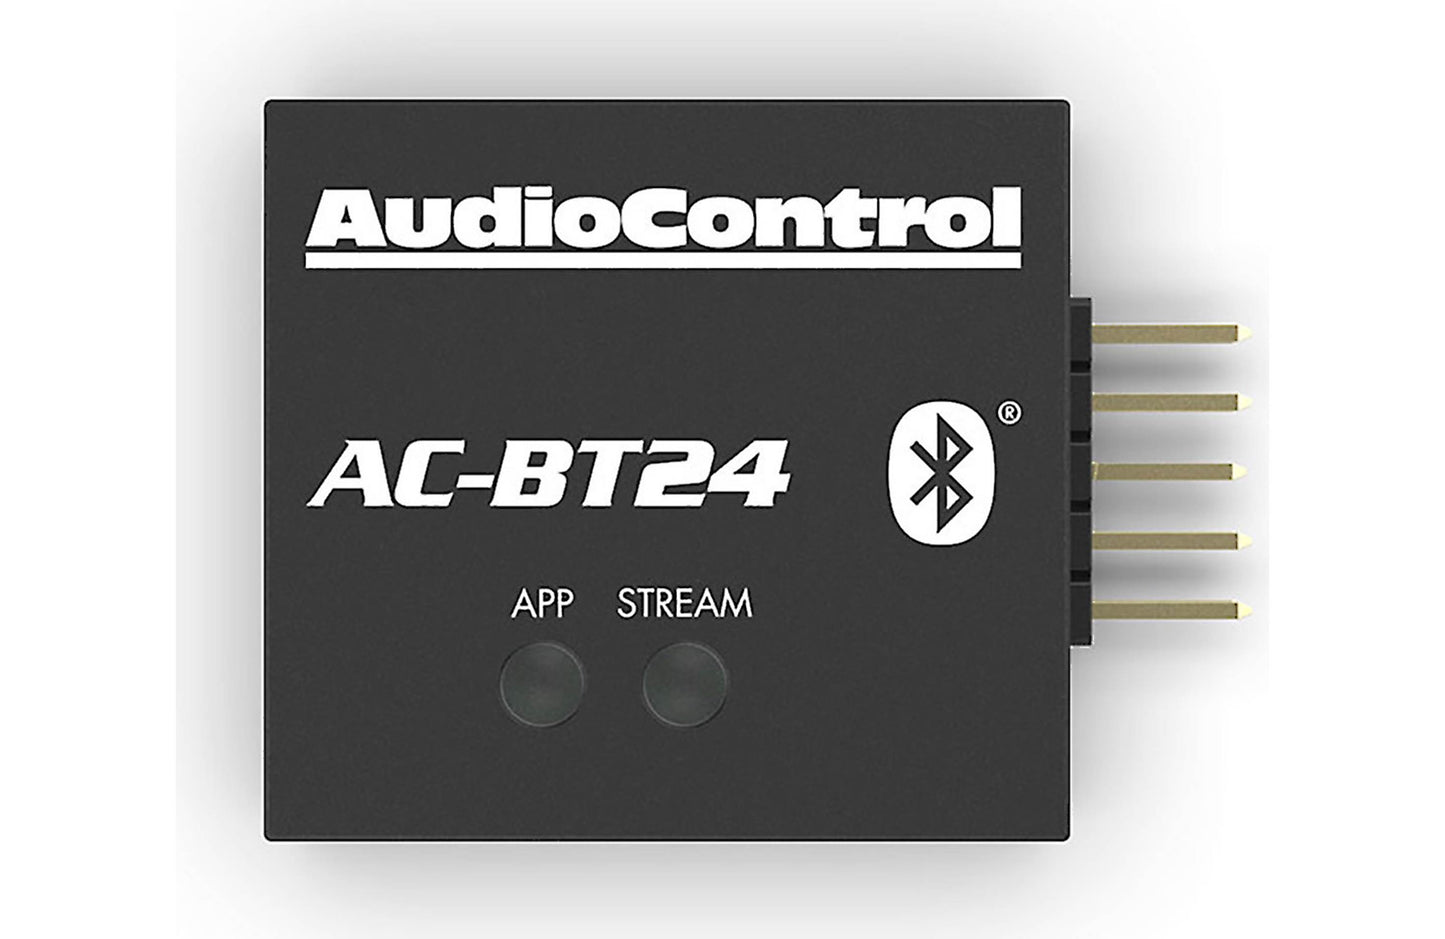 AudioControl AC-BT24 Bluetooth® adapter for an AudioControl DSP device